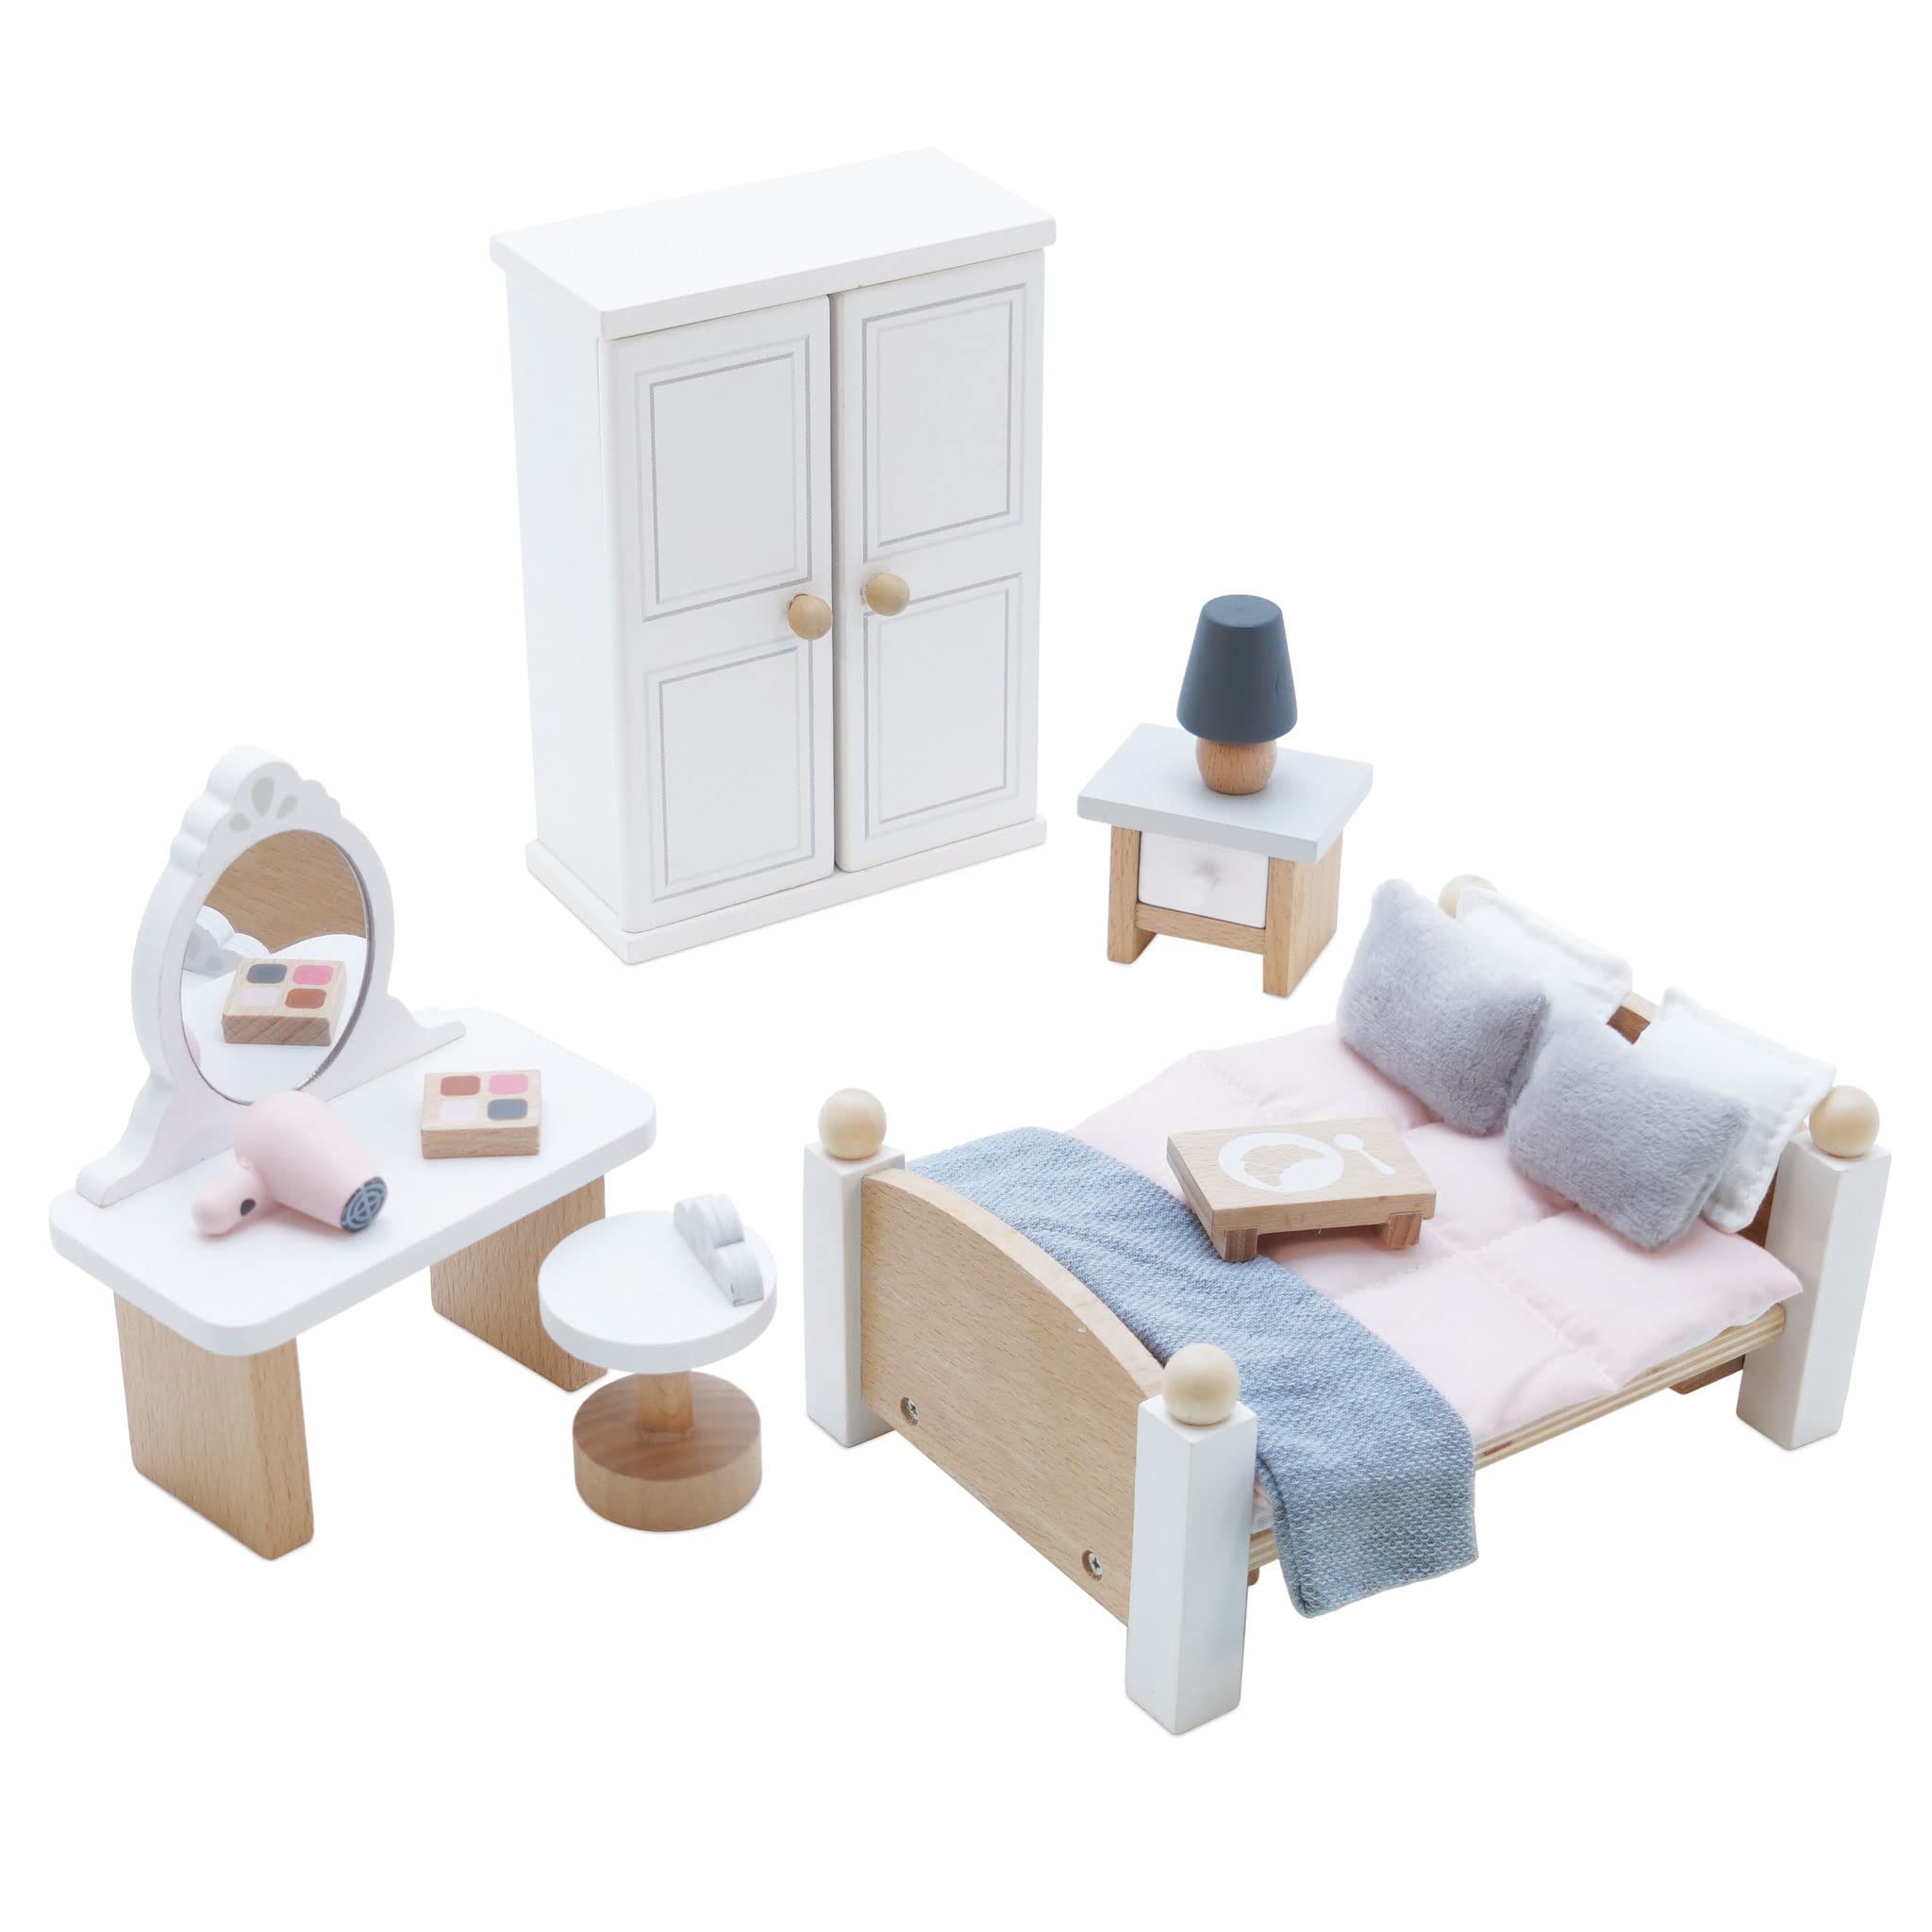 Le Toy Van - Wooden Daisylane Master Bedroom Dolls House | Accessories Play Set For Dolls Houses | Girls and Boys Dolls House Furniture Sets - Suitable For Ages 3+, ME057, Small